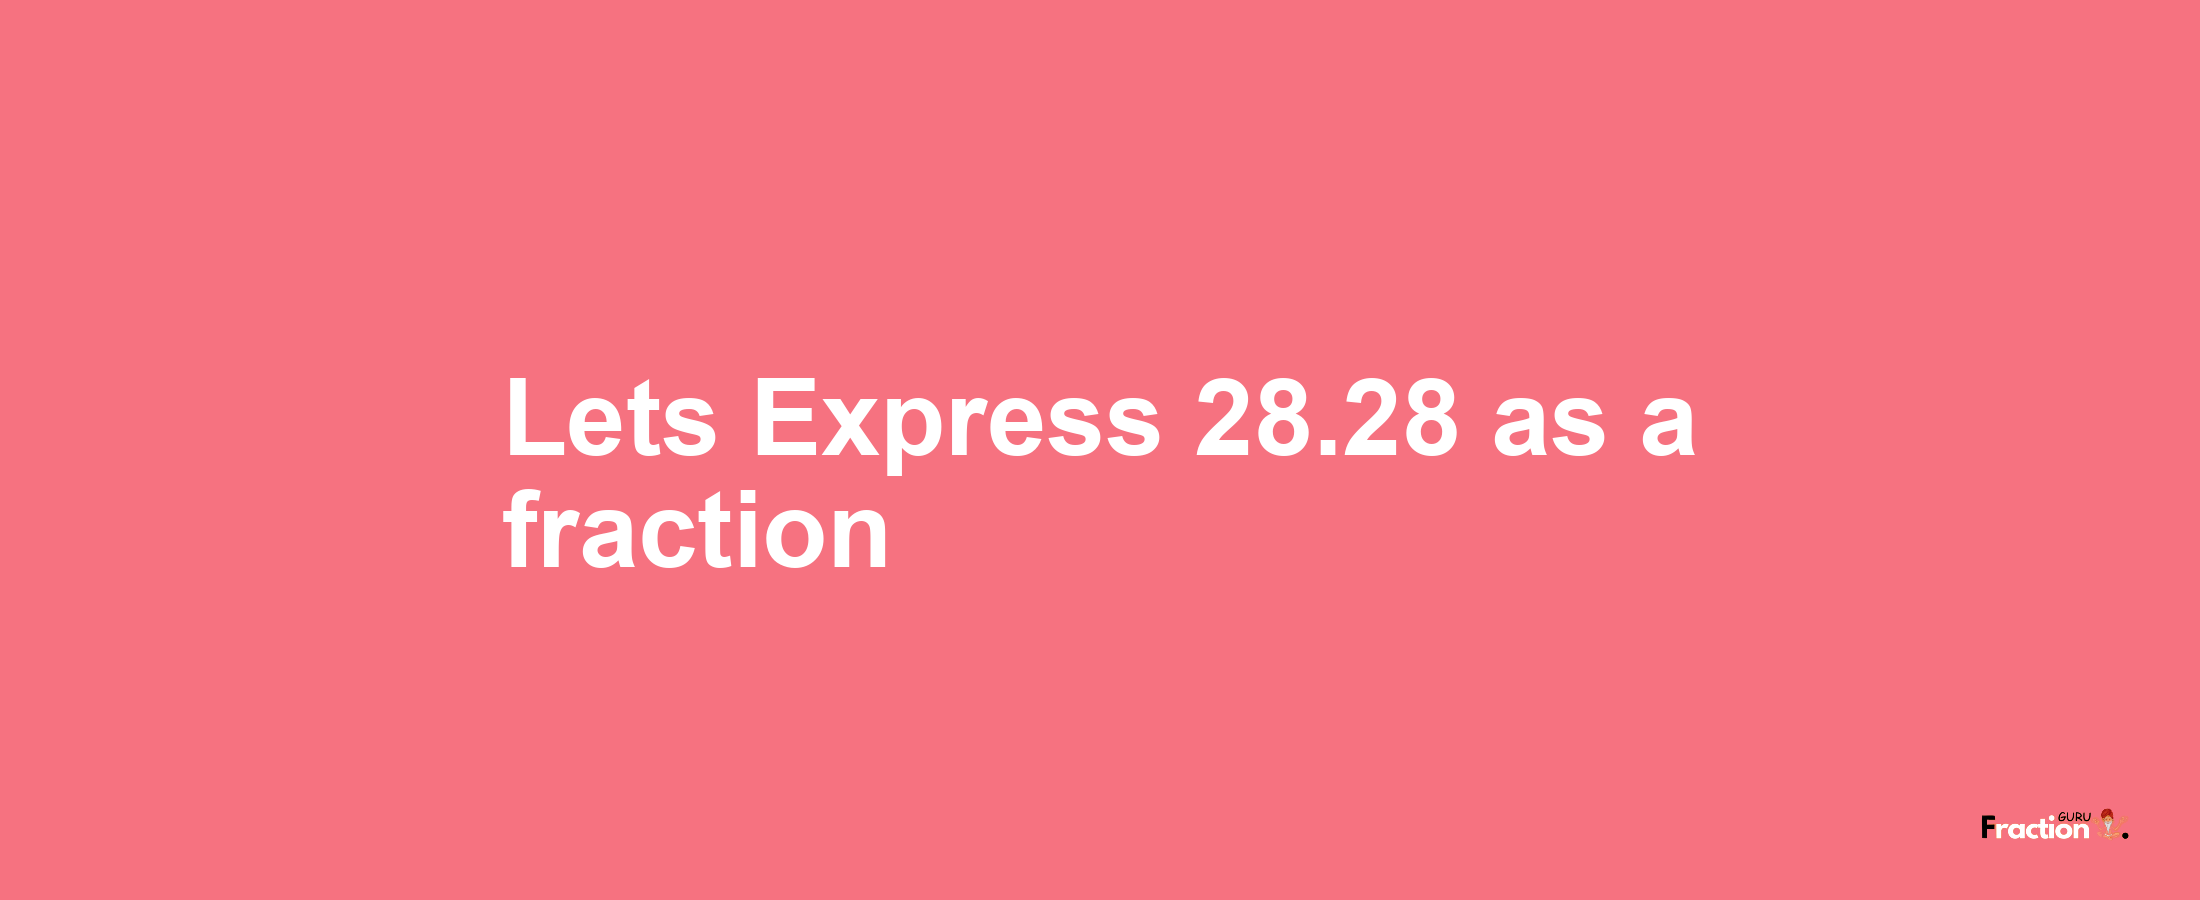 Lets Express 28.28 as afraction